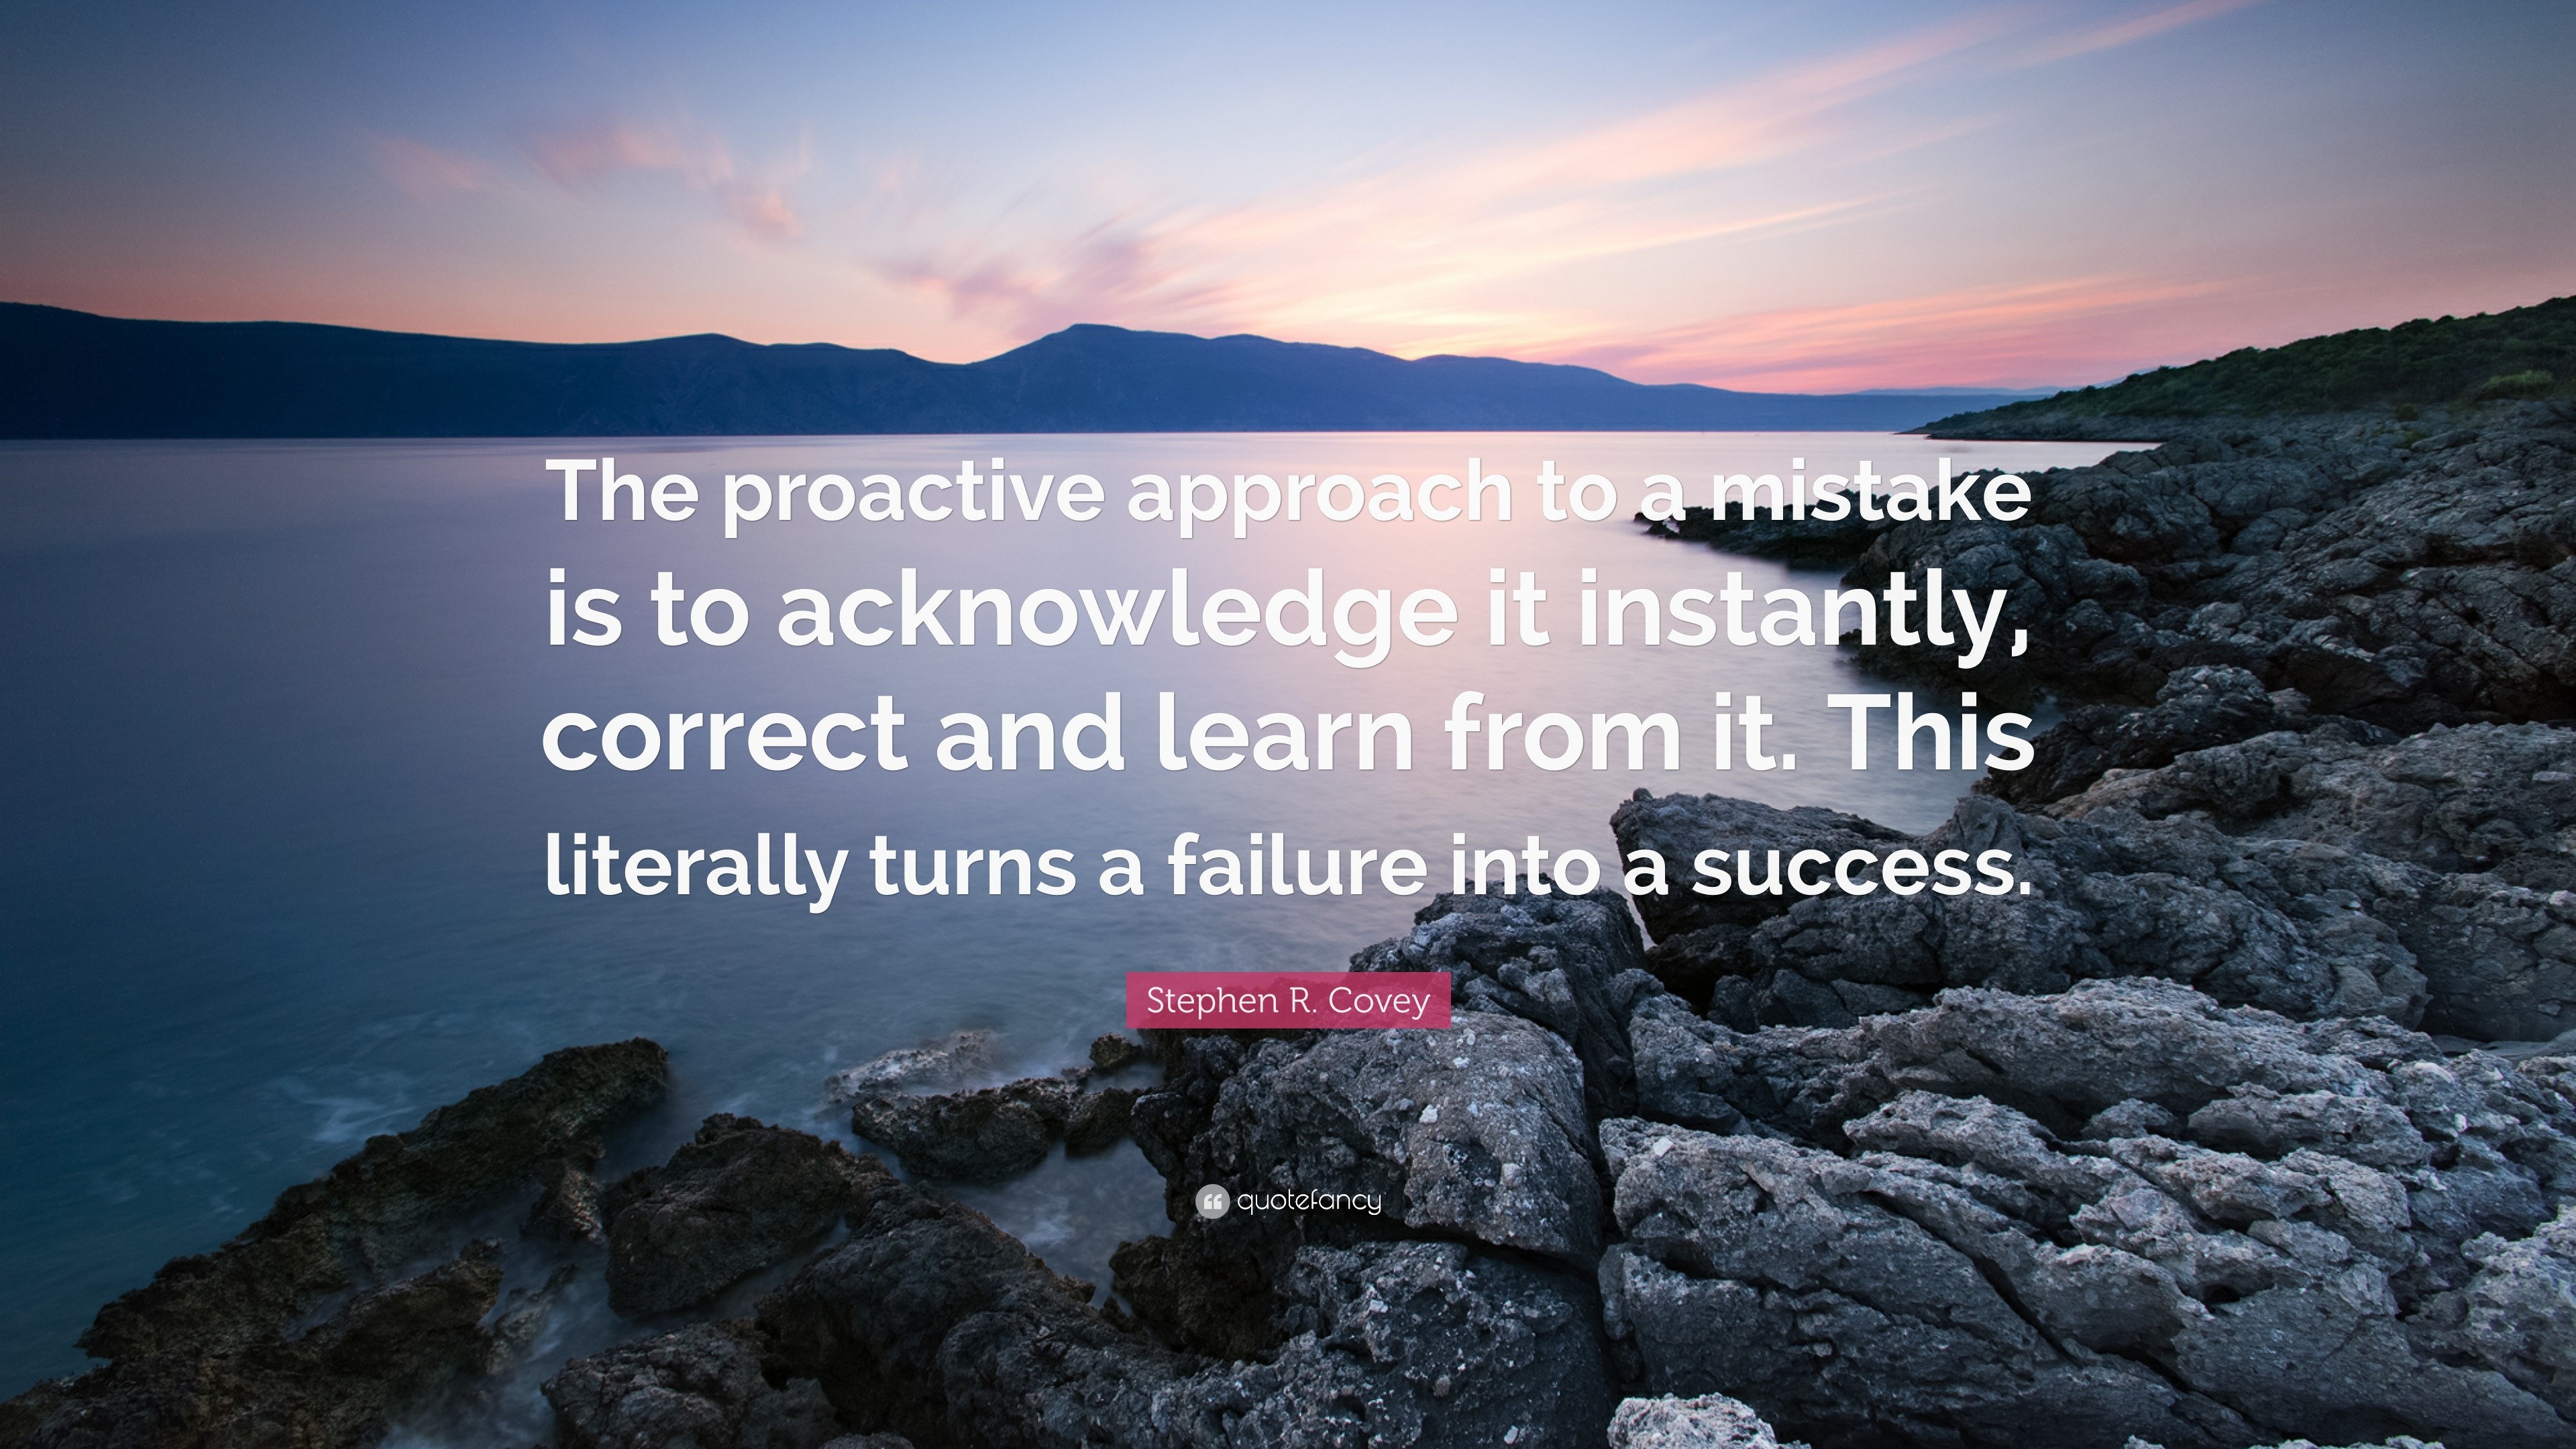 Stephen R Covey Quote The Proactive Approach To A Mistake Is To Acknowledge It Instantly Correct And Learn From It This Literally Turns A Fa